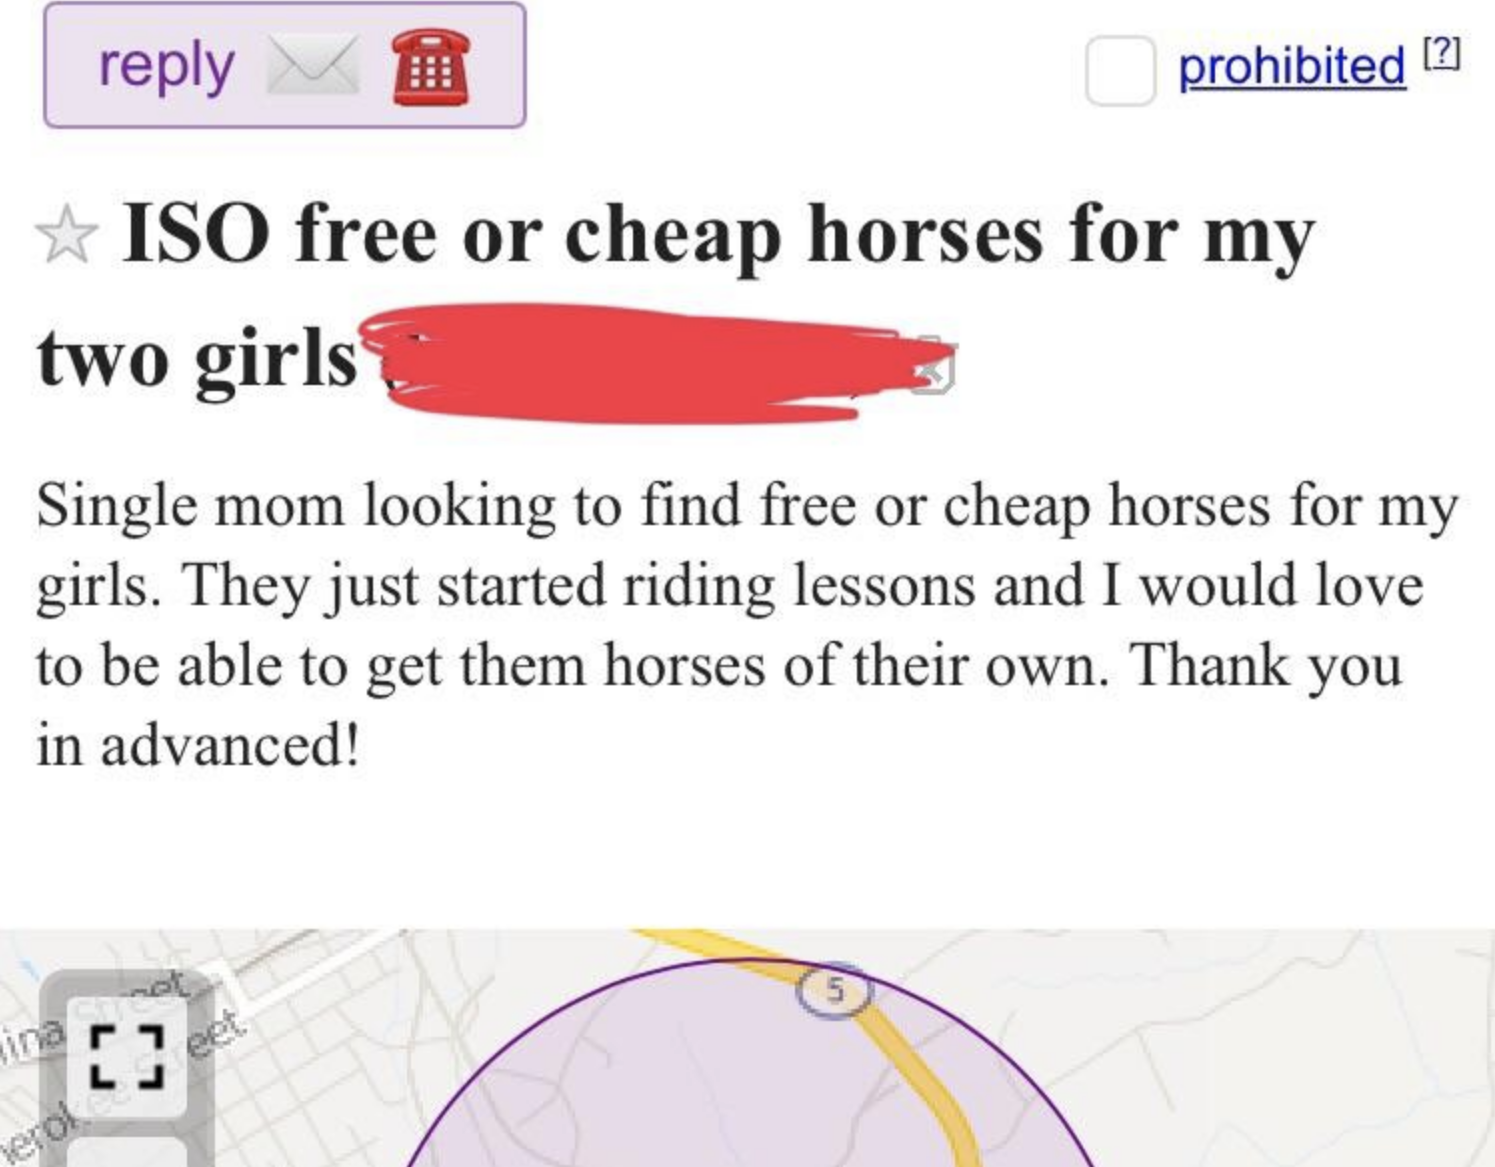 She&#x27;s &quot;ISO free or cheap horses&quot; for her two daughters